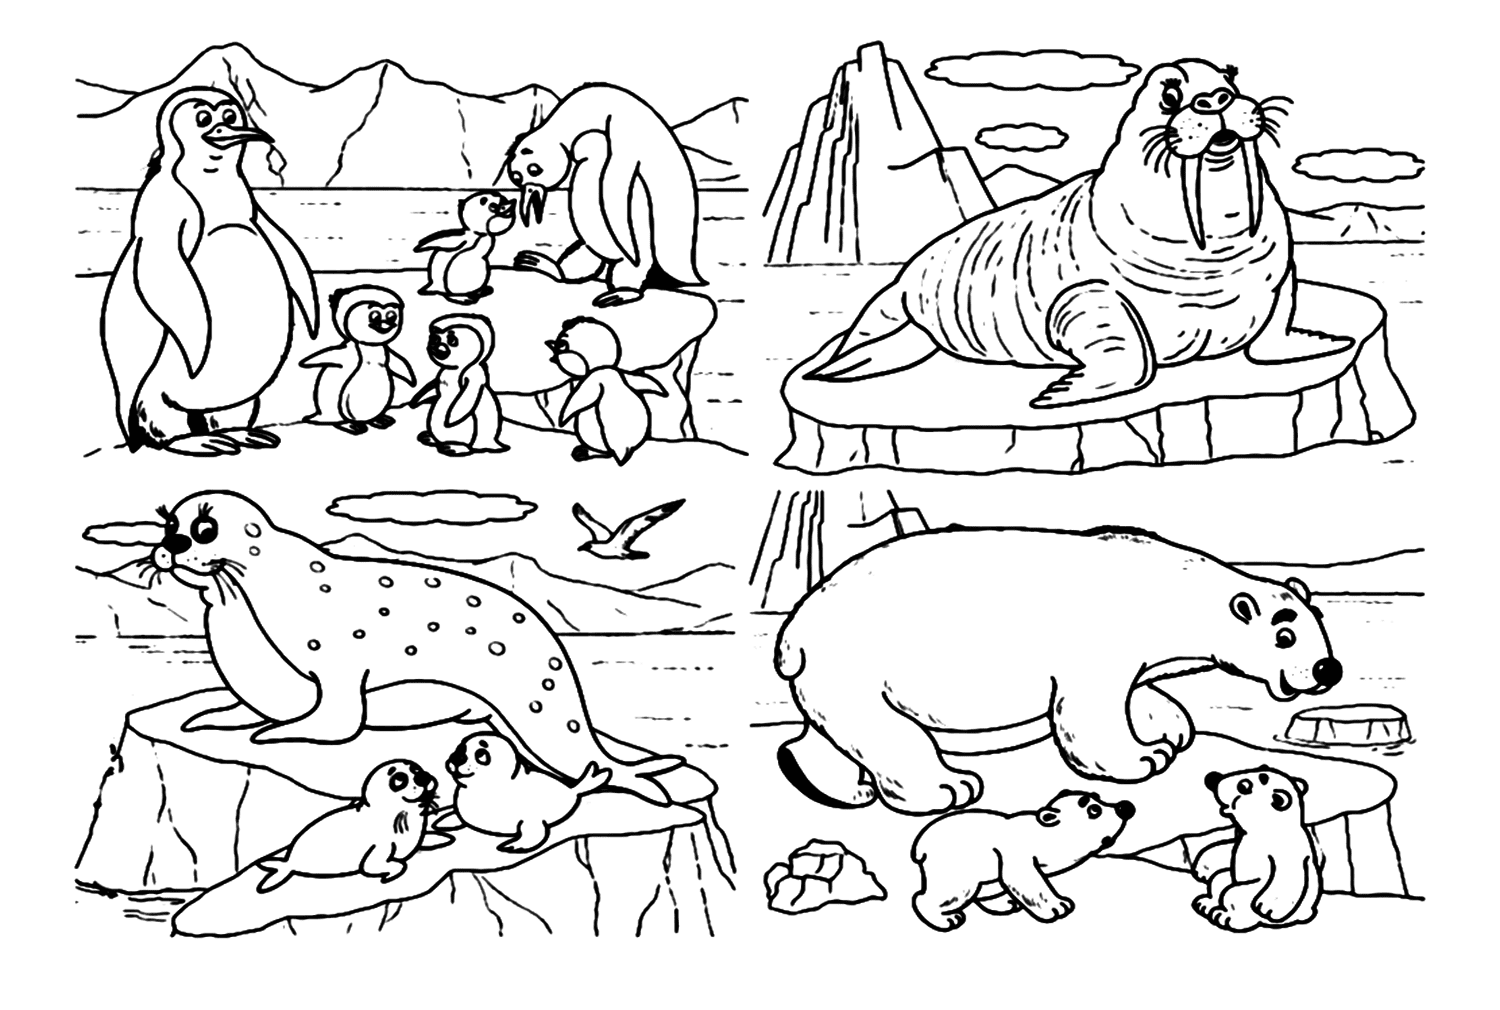 Walrus With Other Mammals Coloring Page - Free Printable Coloring Pages